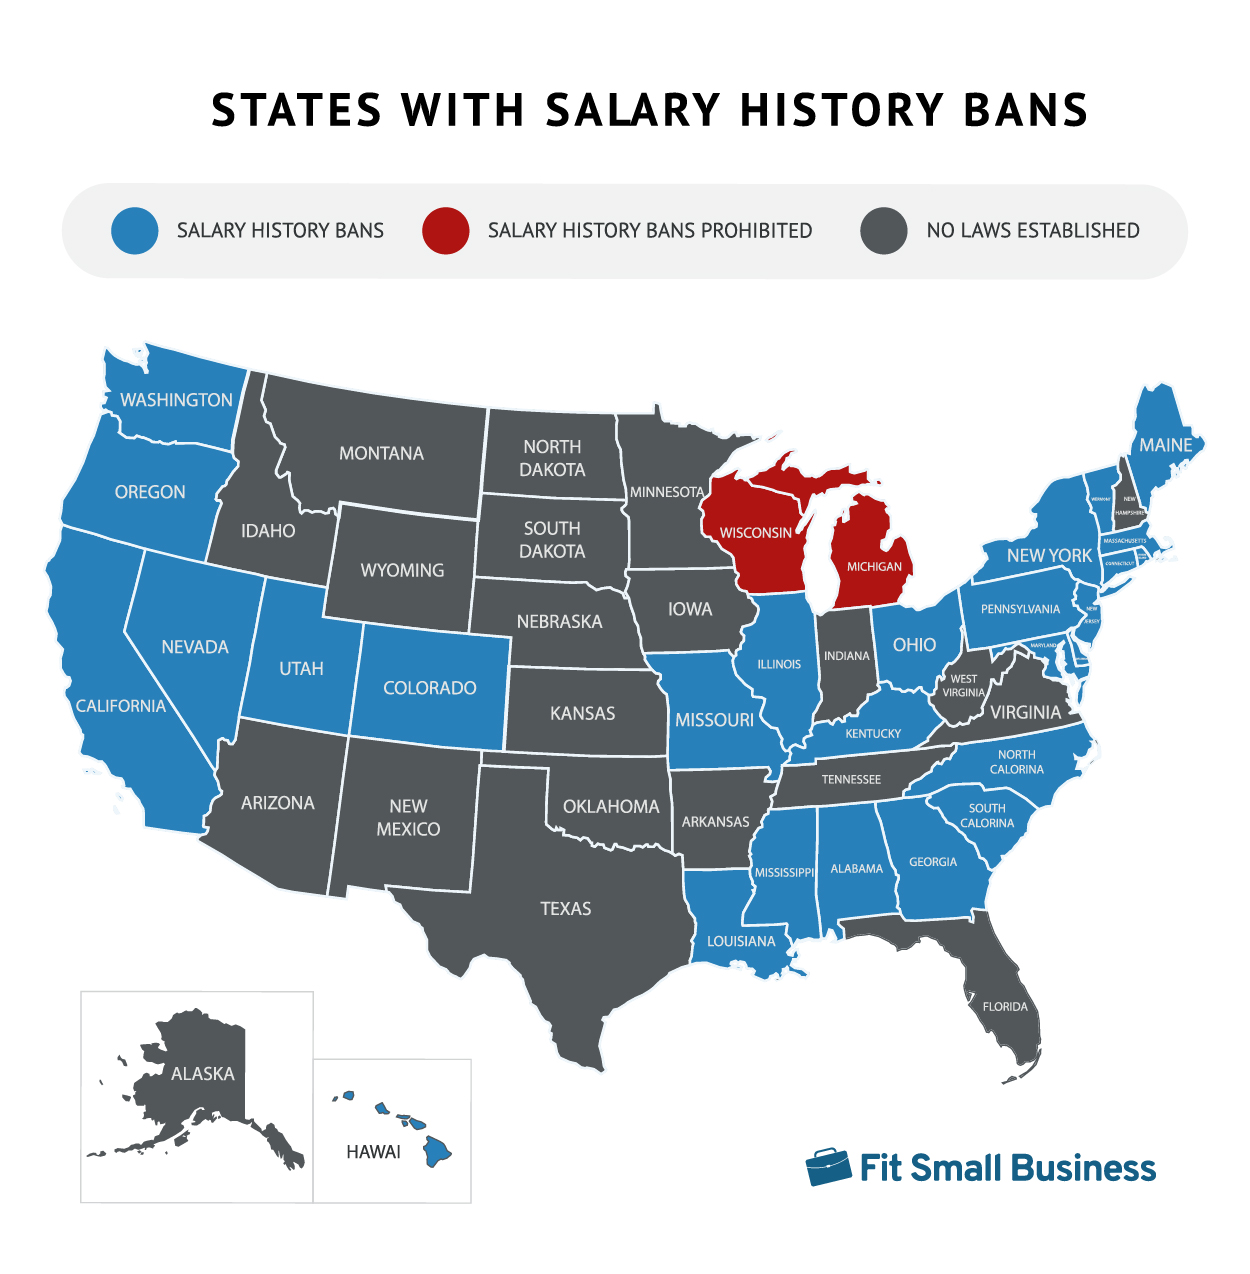 Showing a graphic of states with salary history bans.